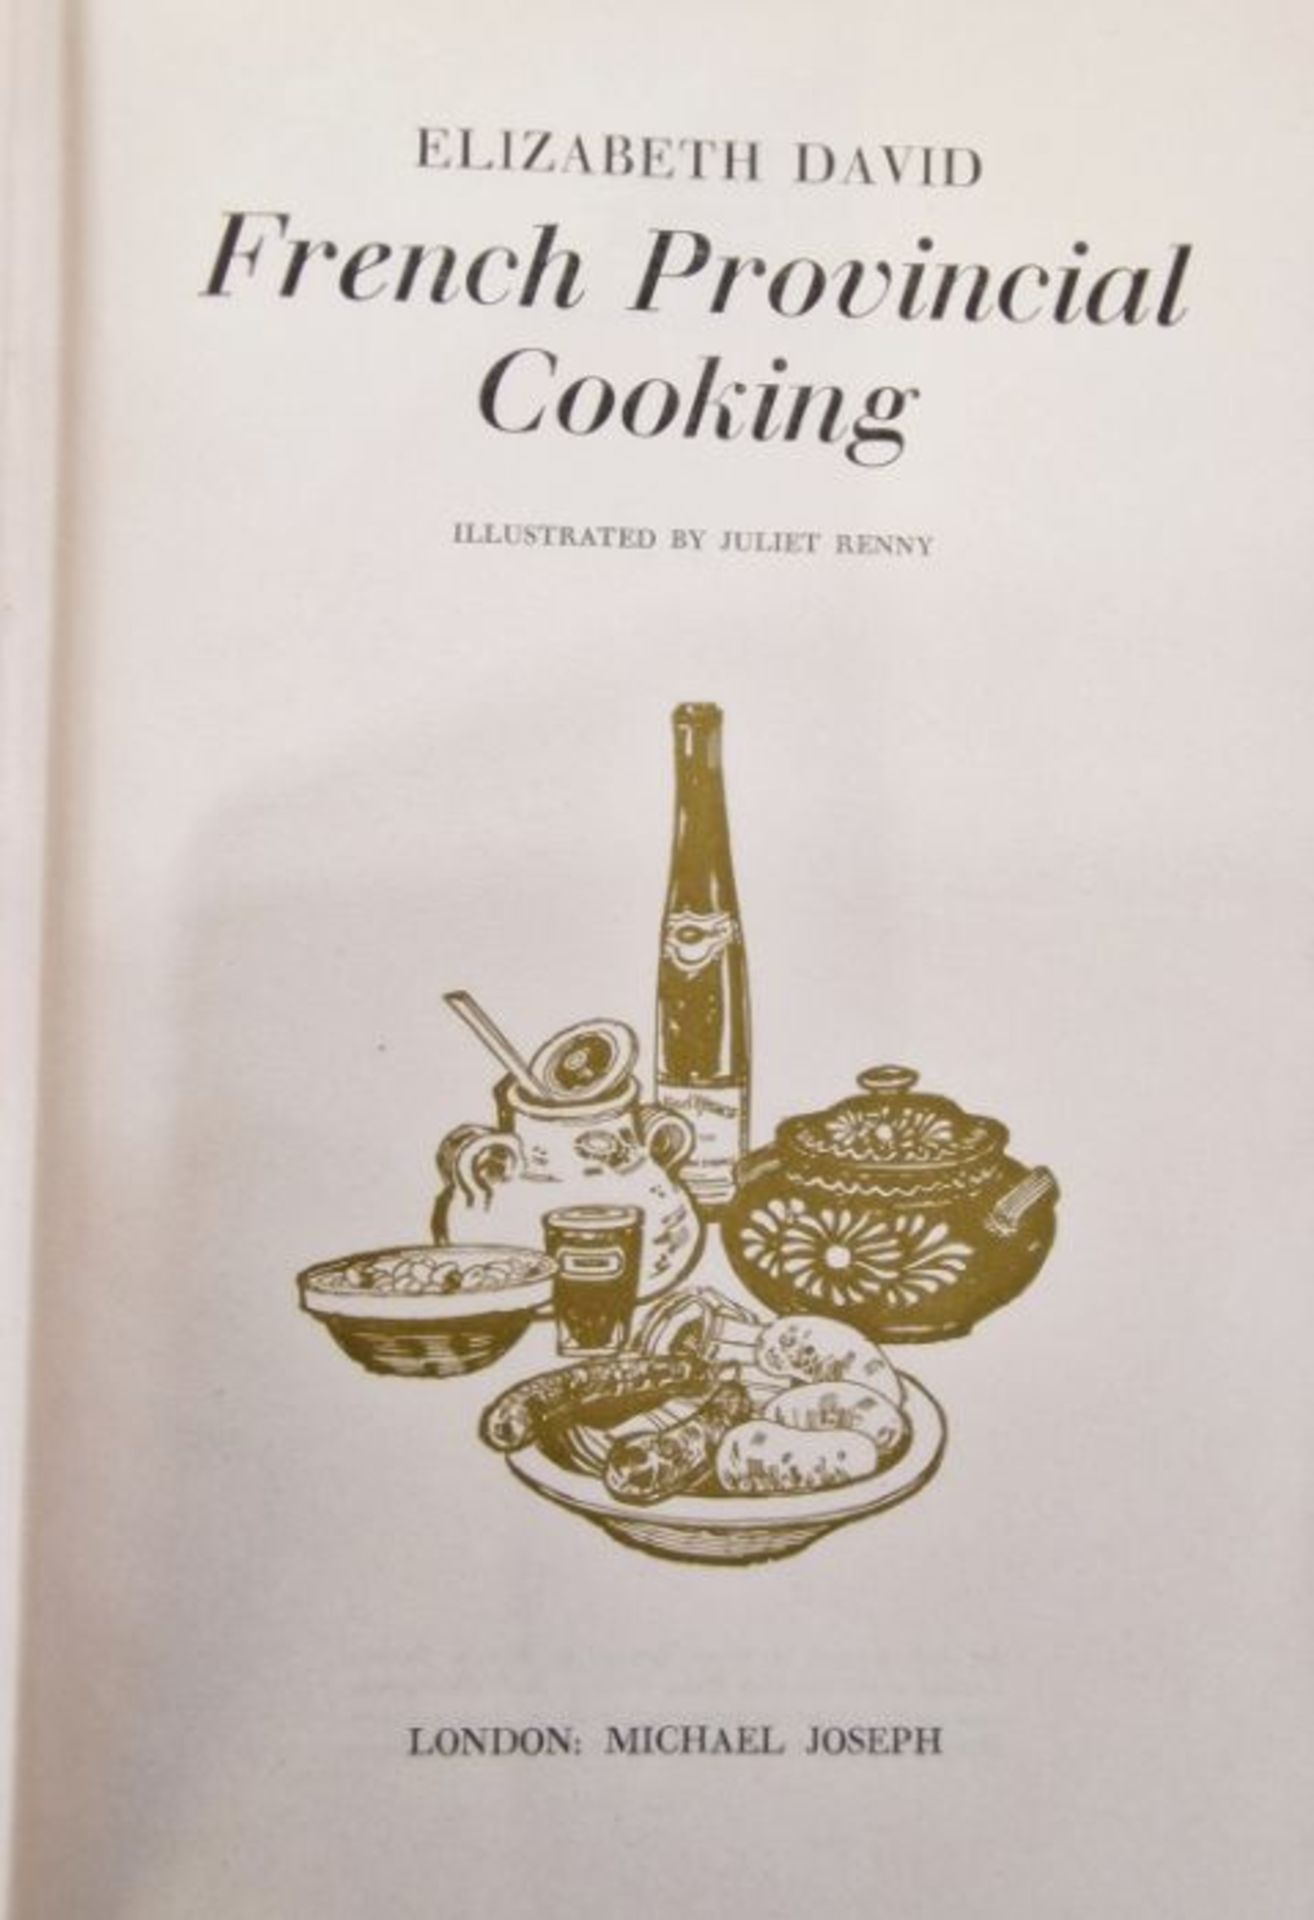 David, Elizabeth "French Provincial Cooking", illustrated by Juliet Renny, Michael Joseph 1960, - Image 9 of 15